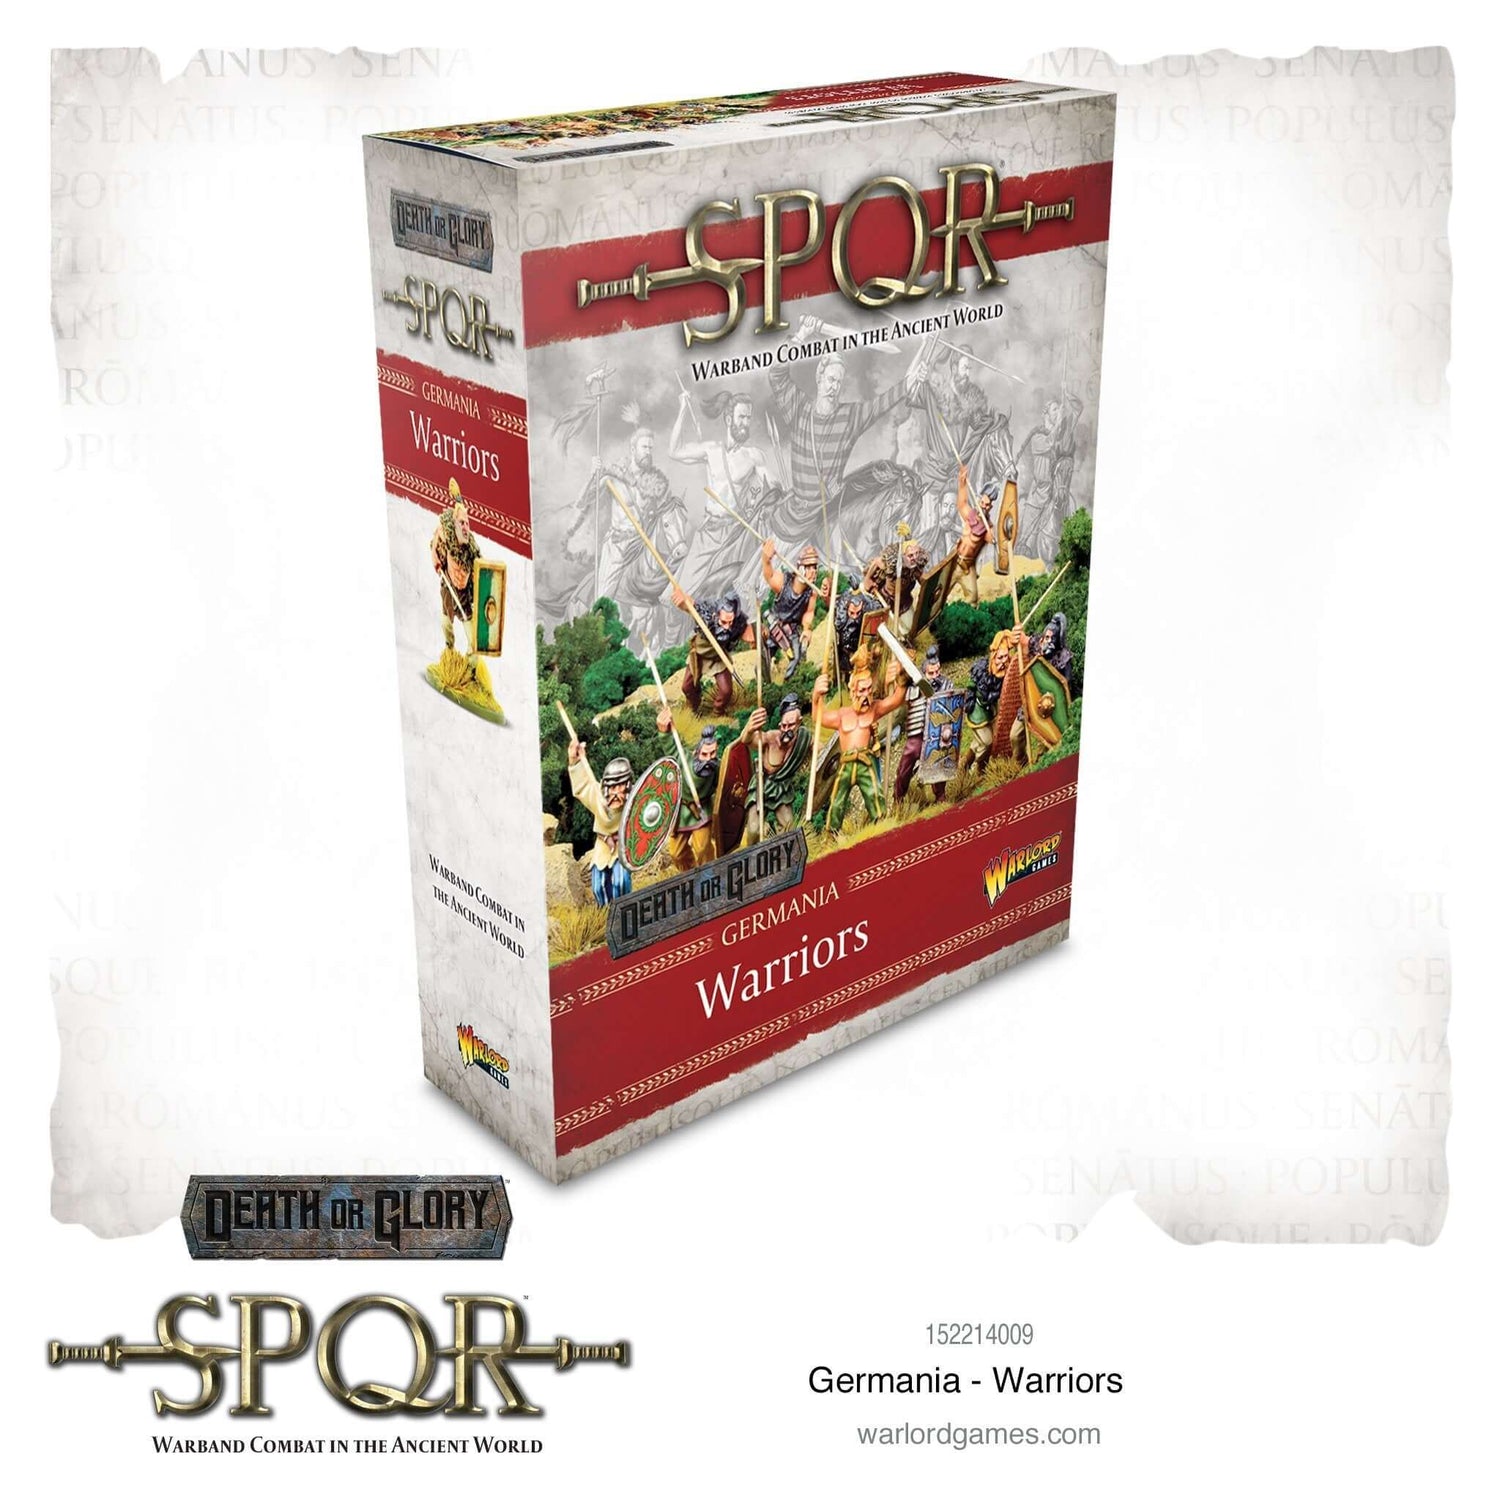 SPQR: Germania - Warriors by Warlord